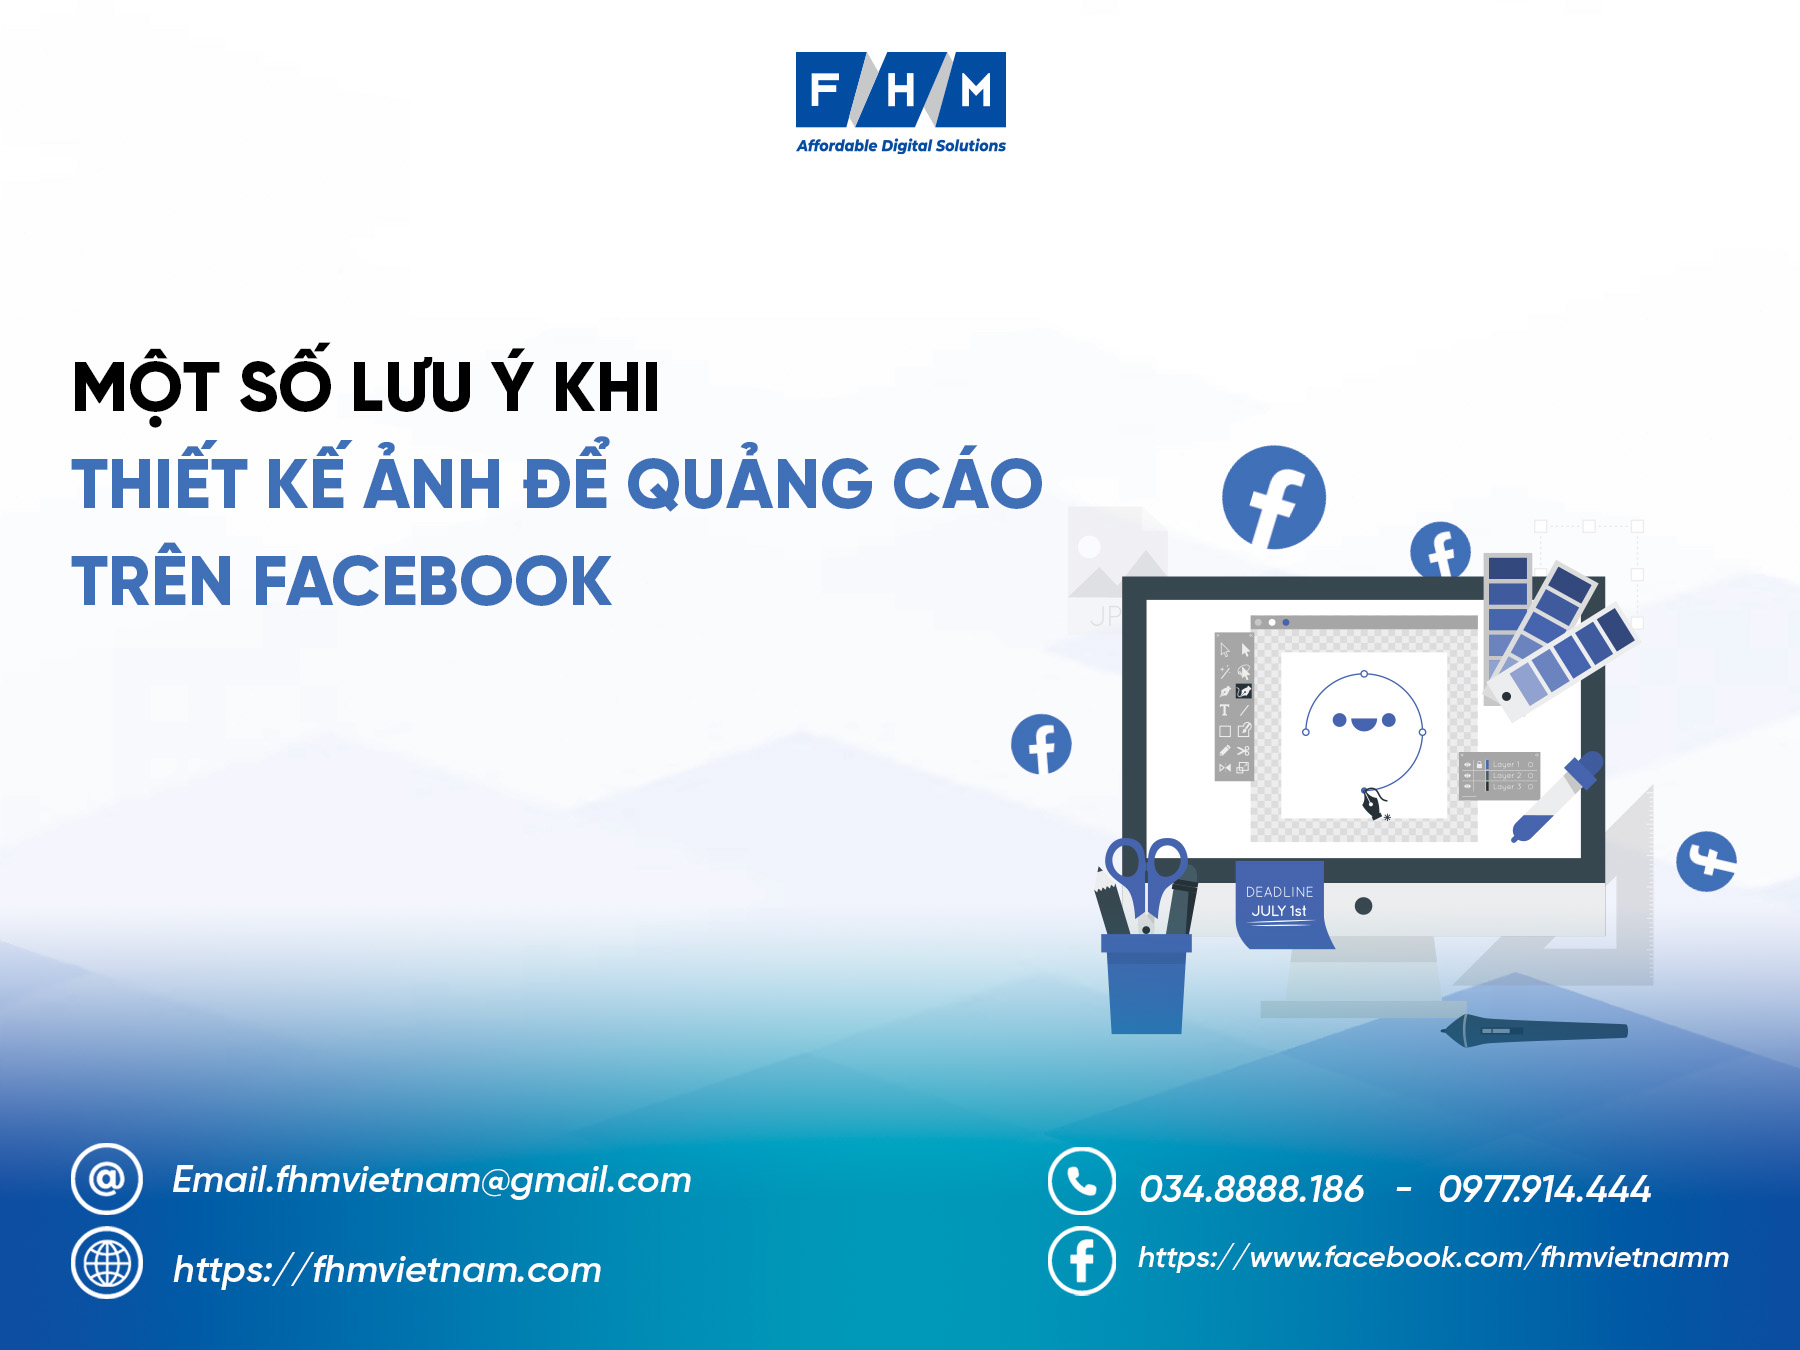 kich-thuoc-anh-quang-cao-facebook-3